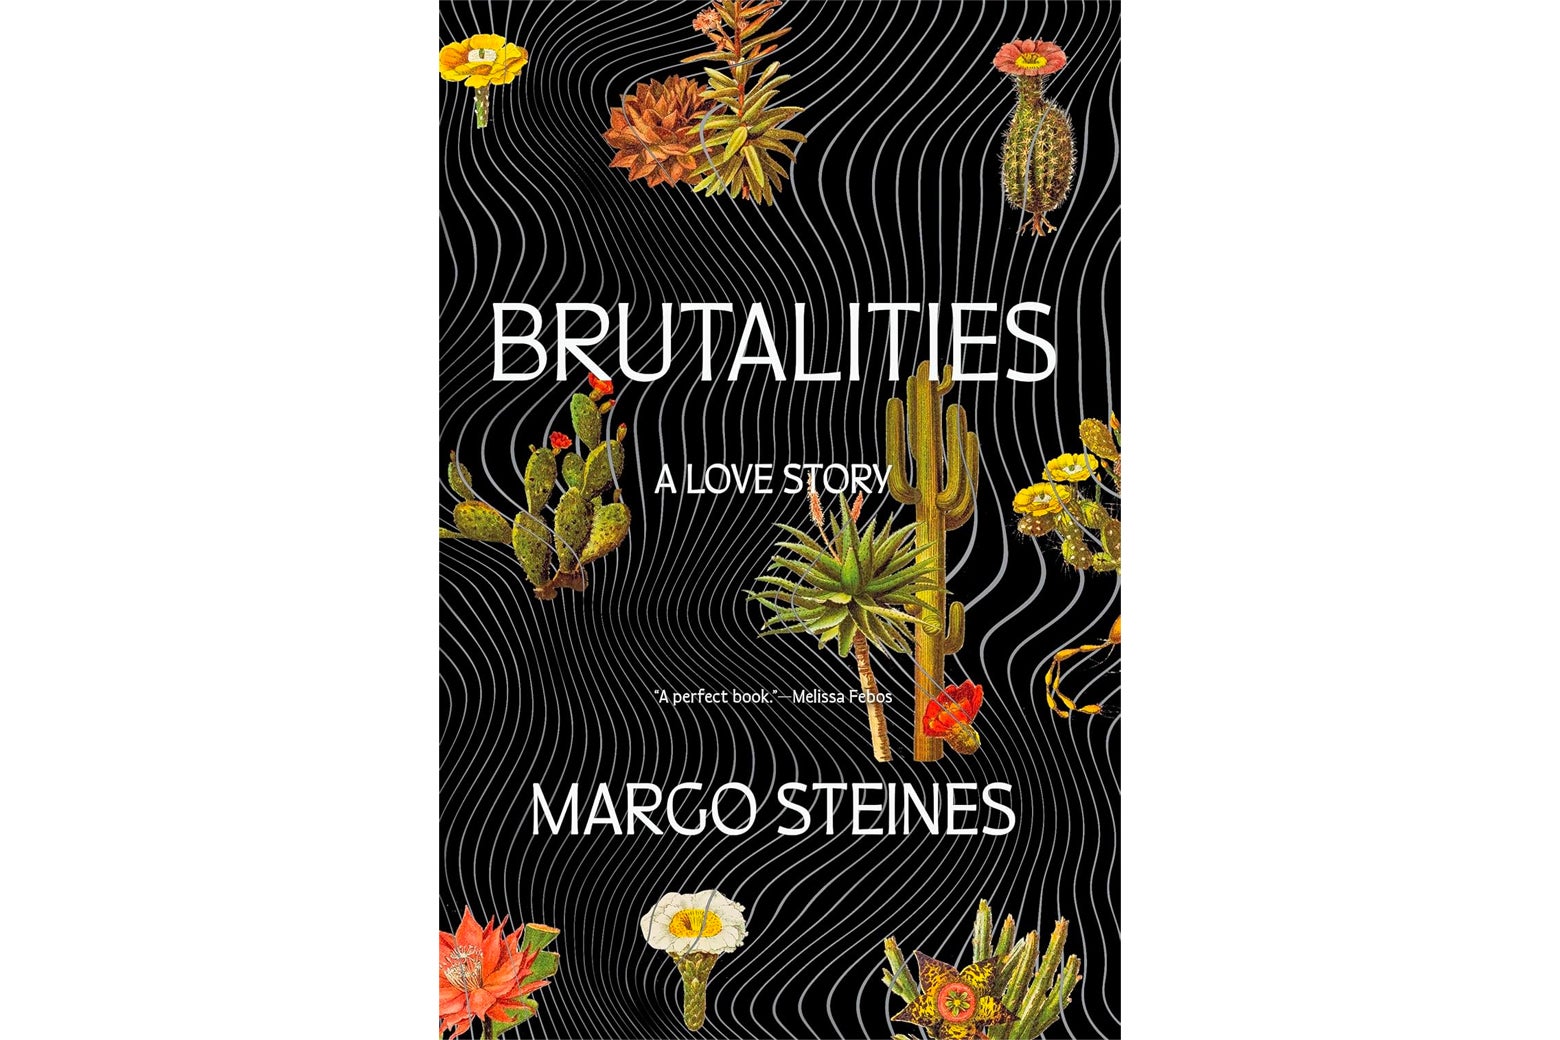 The cover of Brutalities: A Love Story.